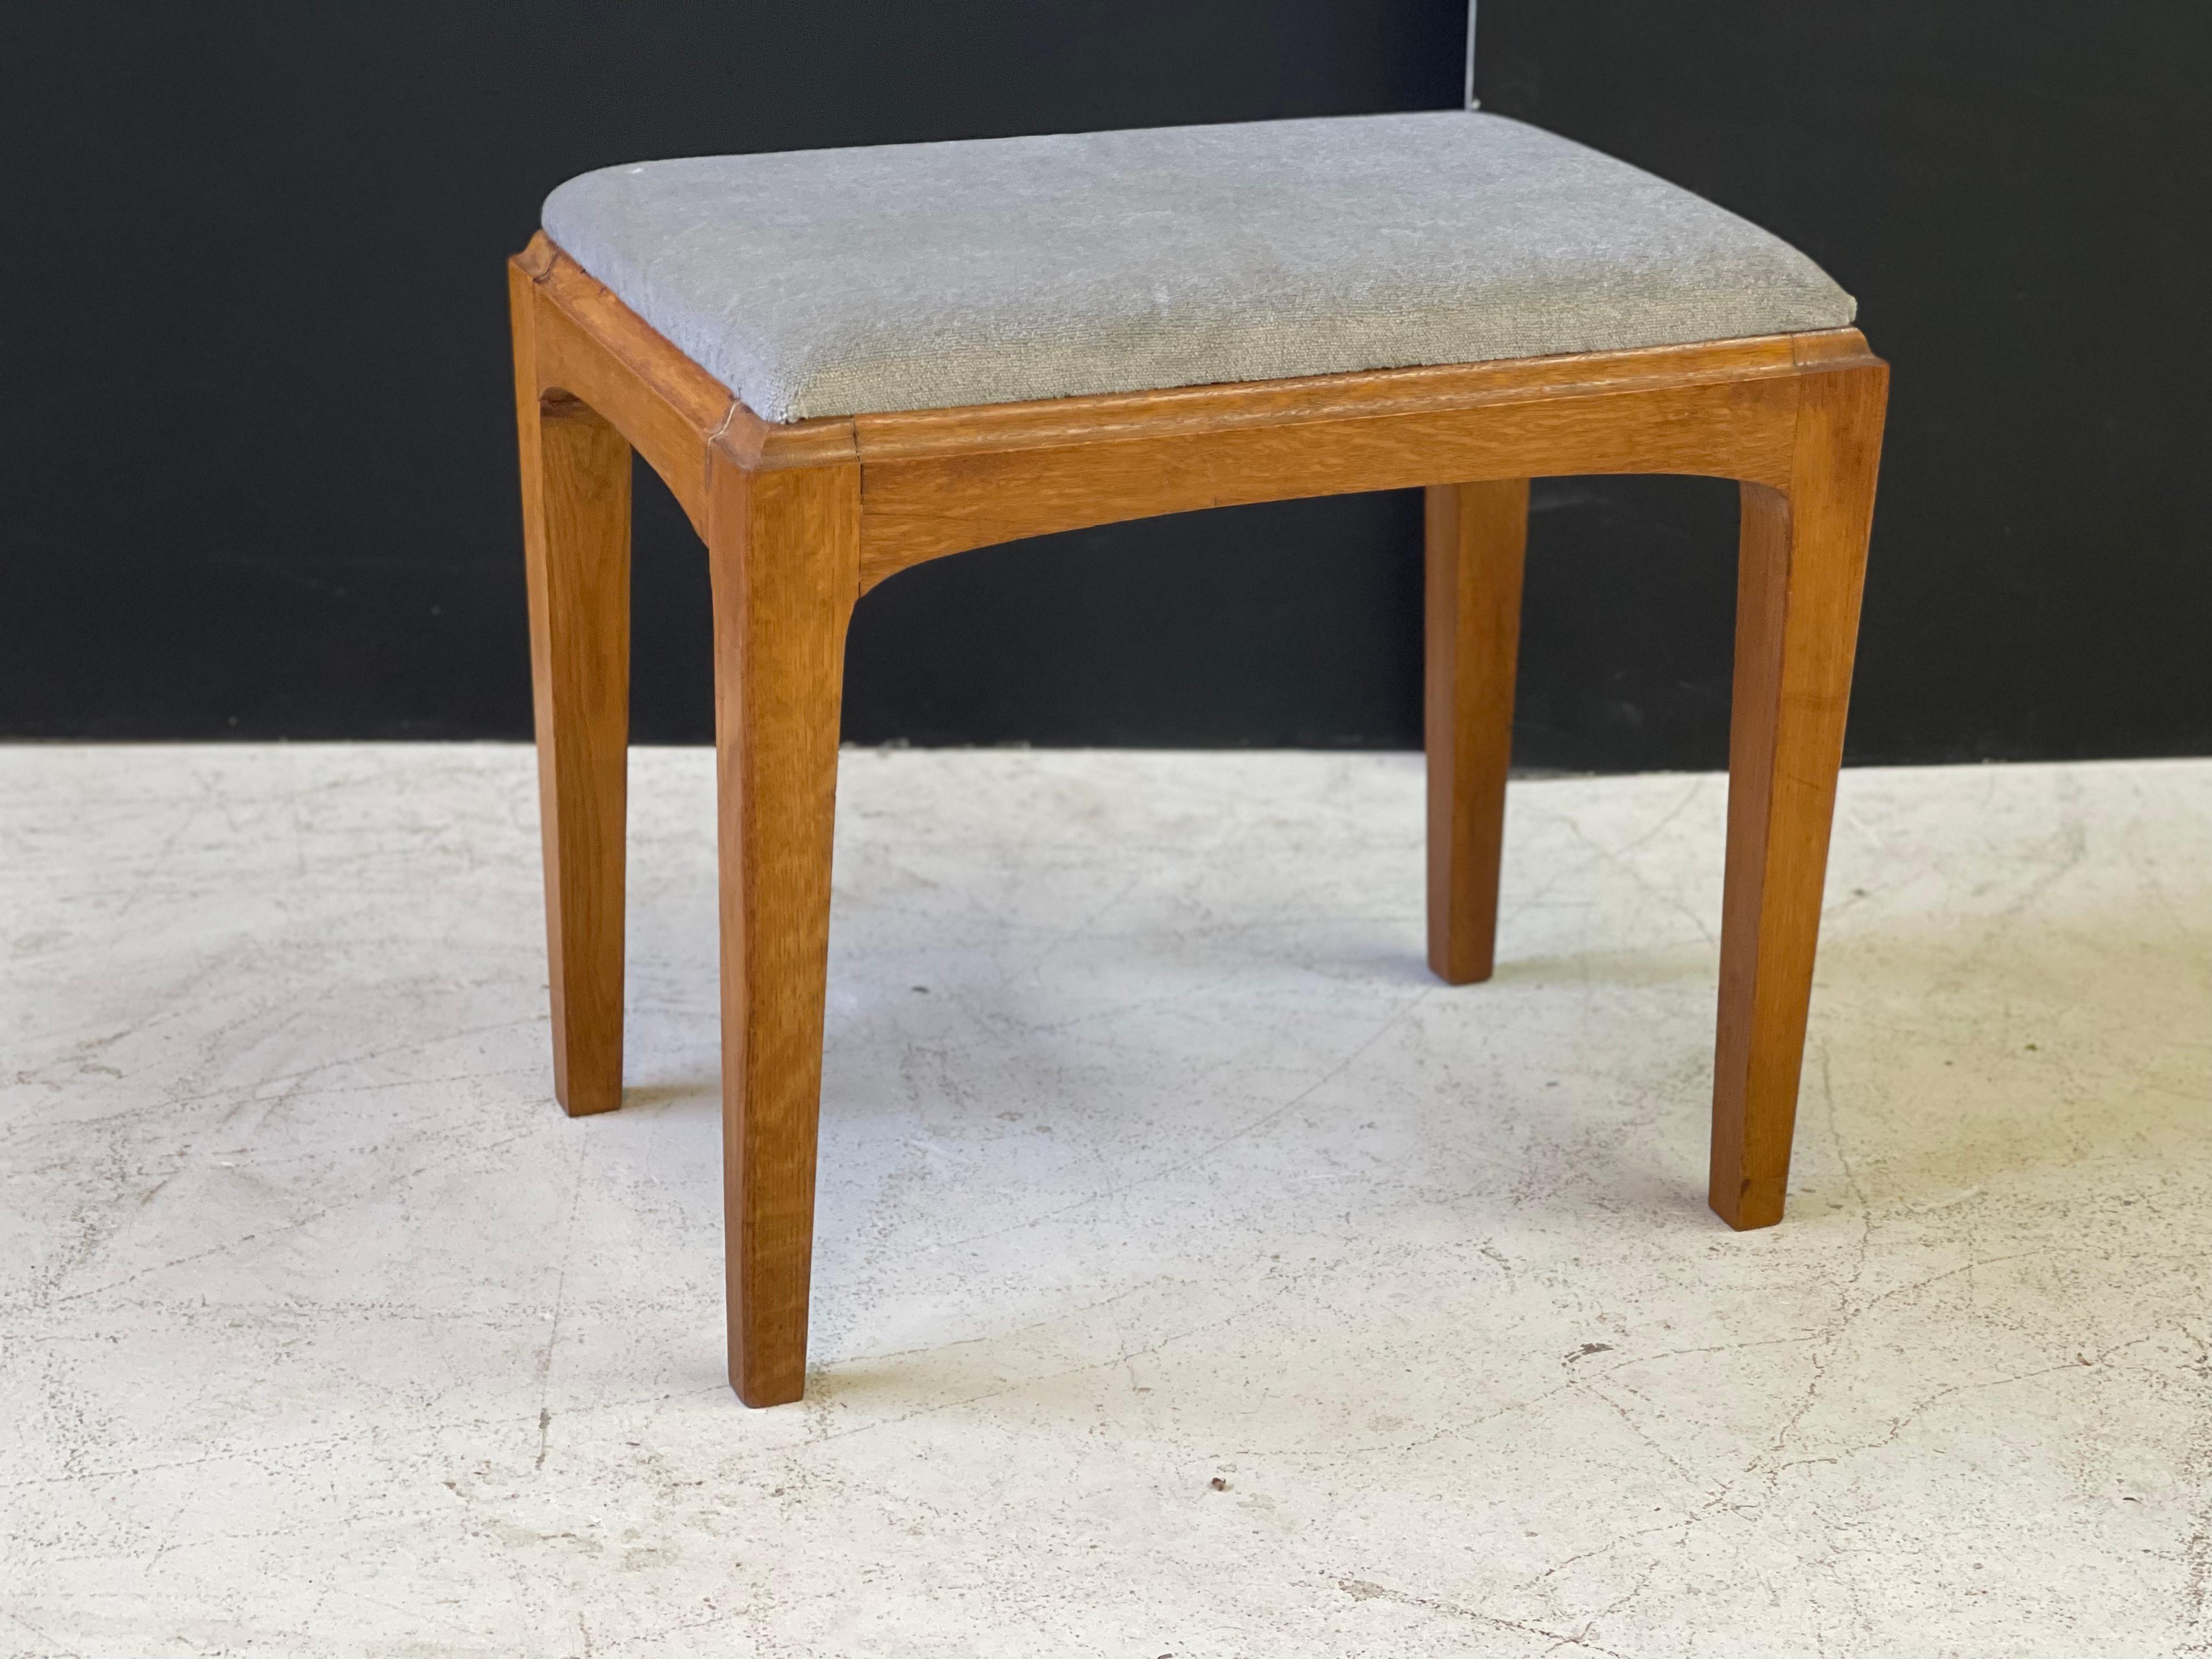 This amazing vintage stool is part of the line designed by John and Sylvia Reid for British manufacturer 'Stag Furniture' in the 1950's. The stool features a contemporary design with tapering block legs and arched aprons. It is made of a light oak